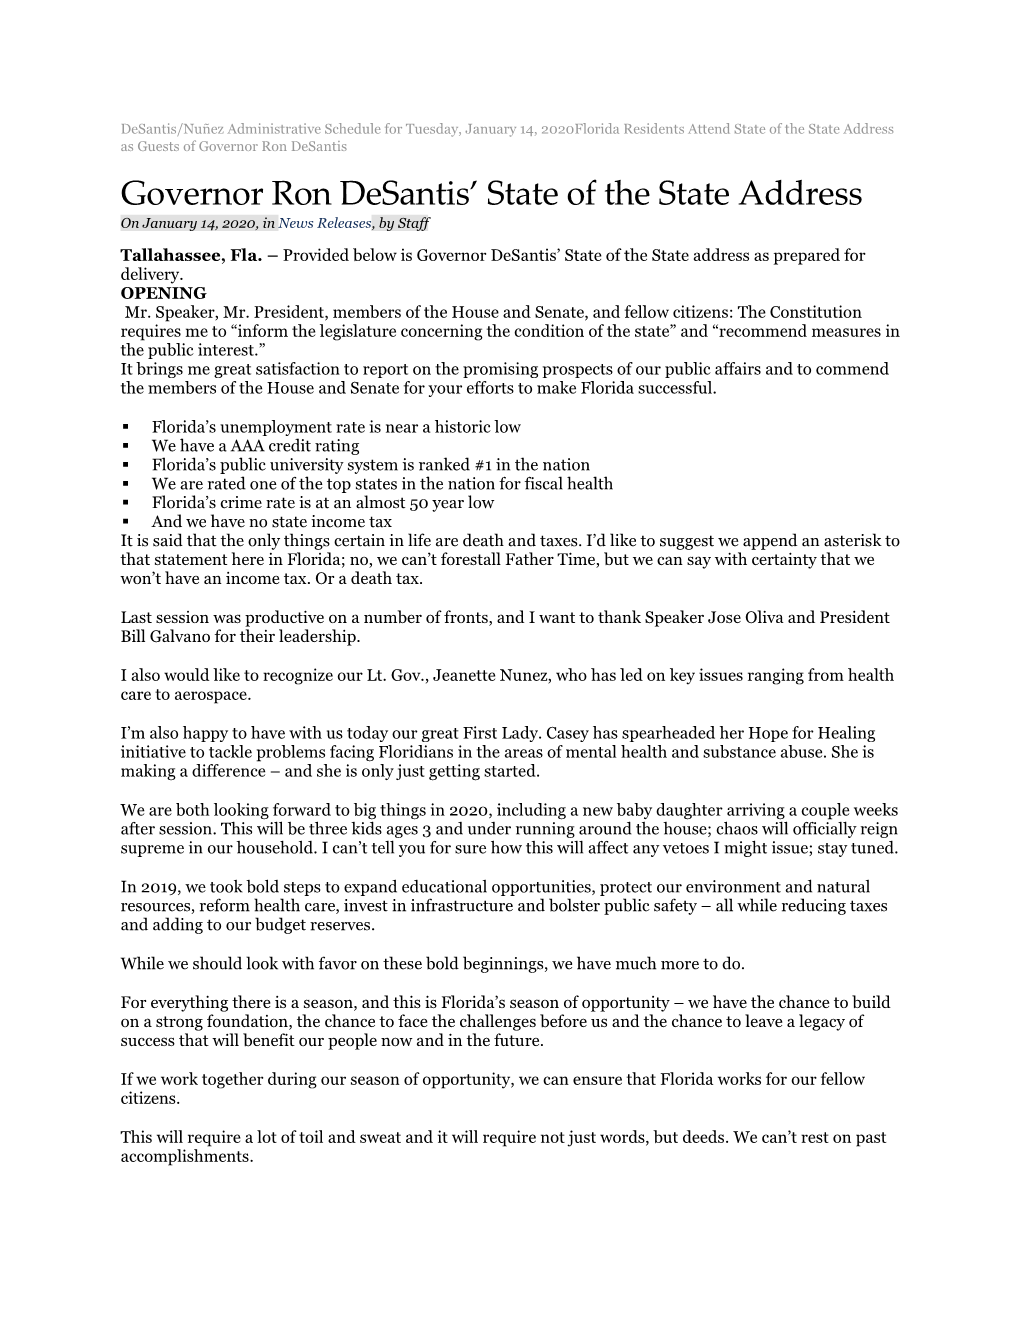 Governor Ron Desantis' State of the State Address